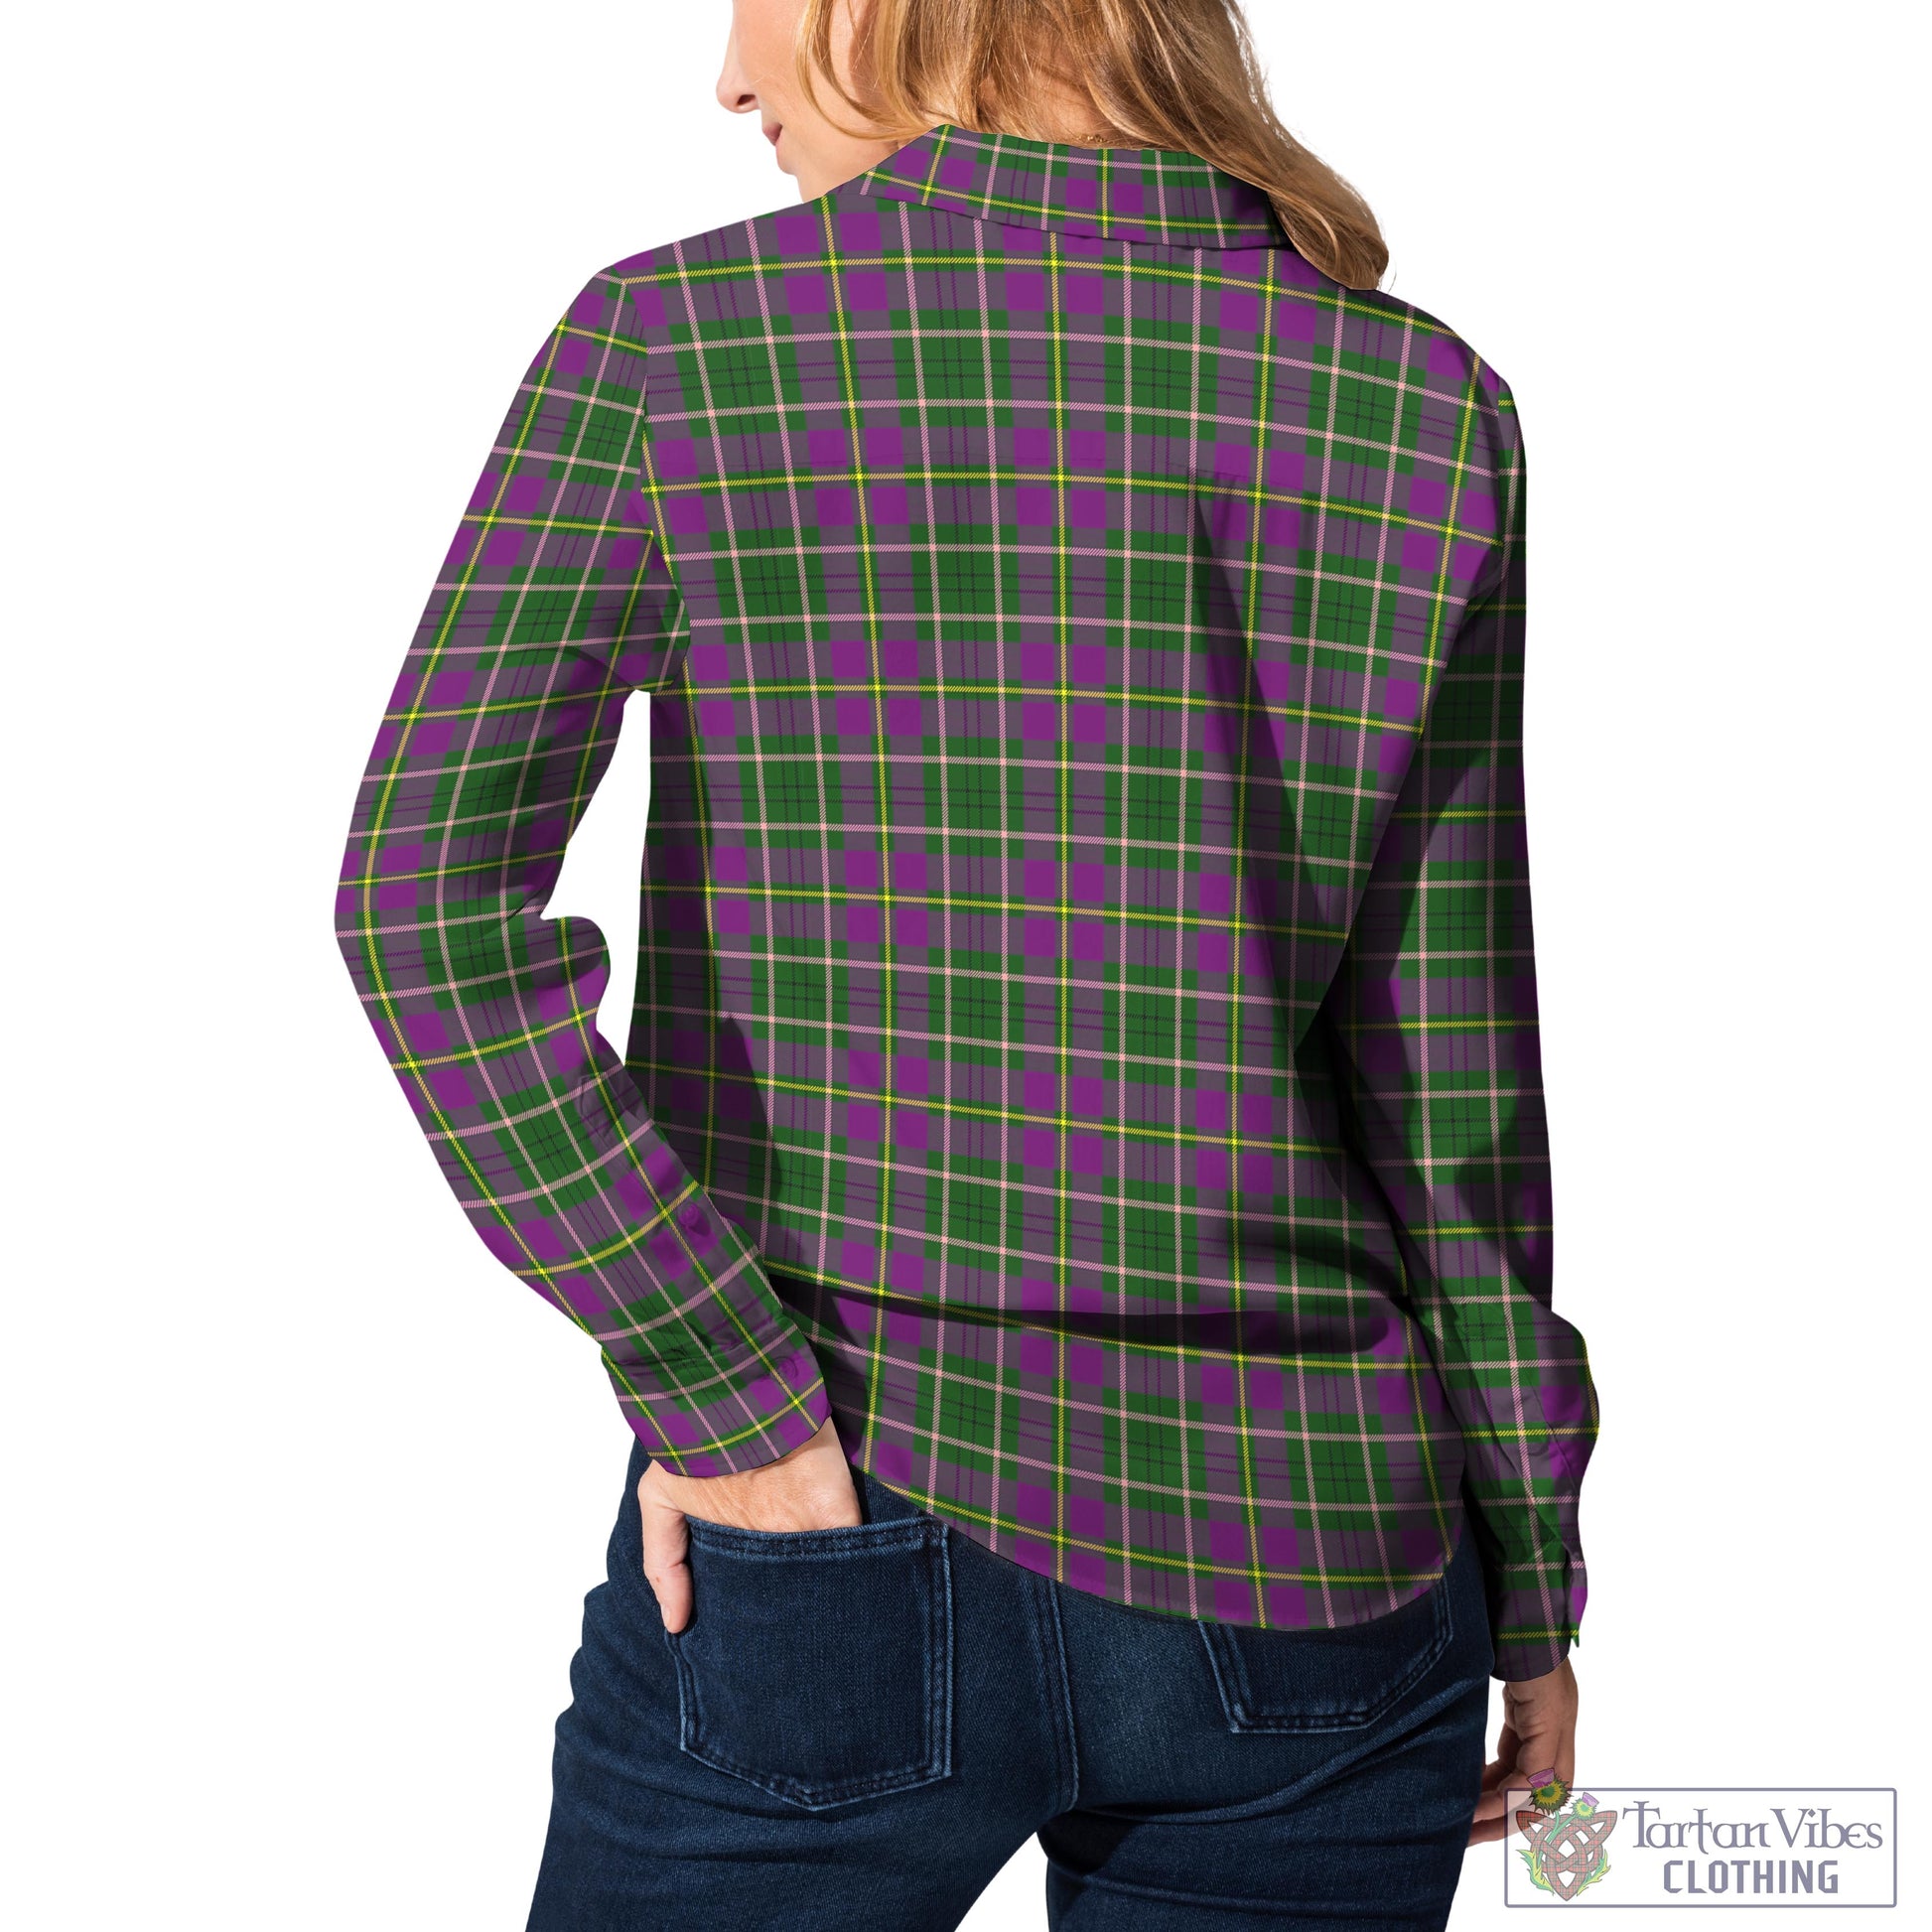 Tartan Vibes Clothing Taylor Tartan Womens Casual Shirt with Family Crest